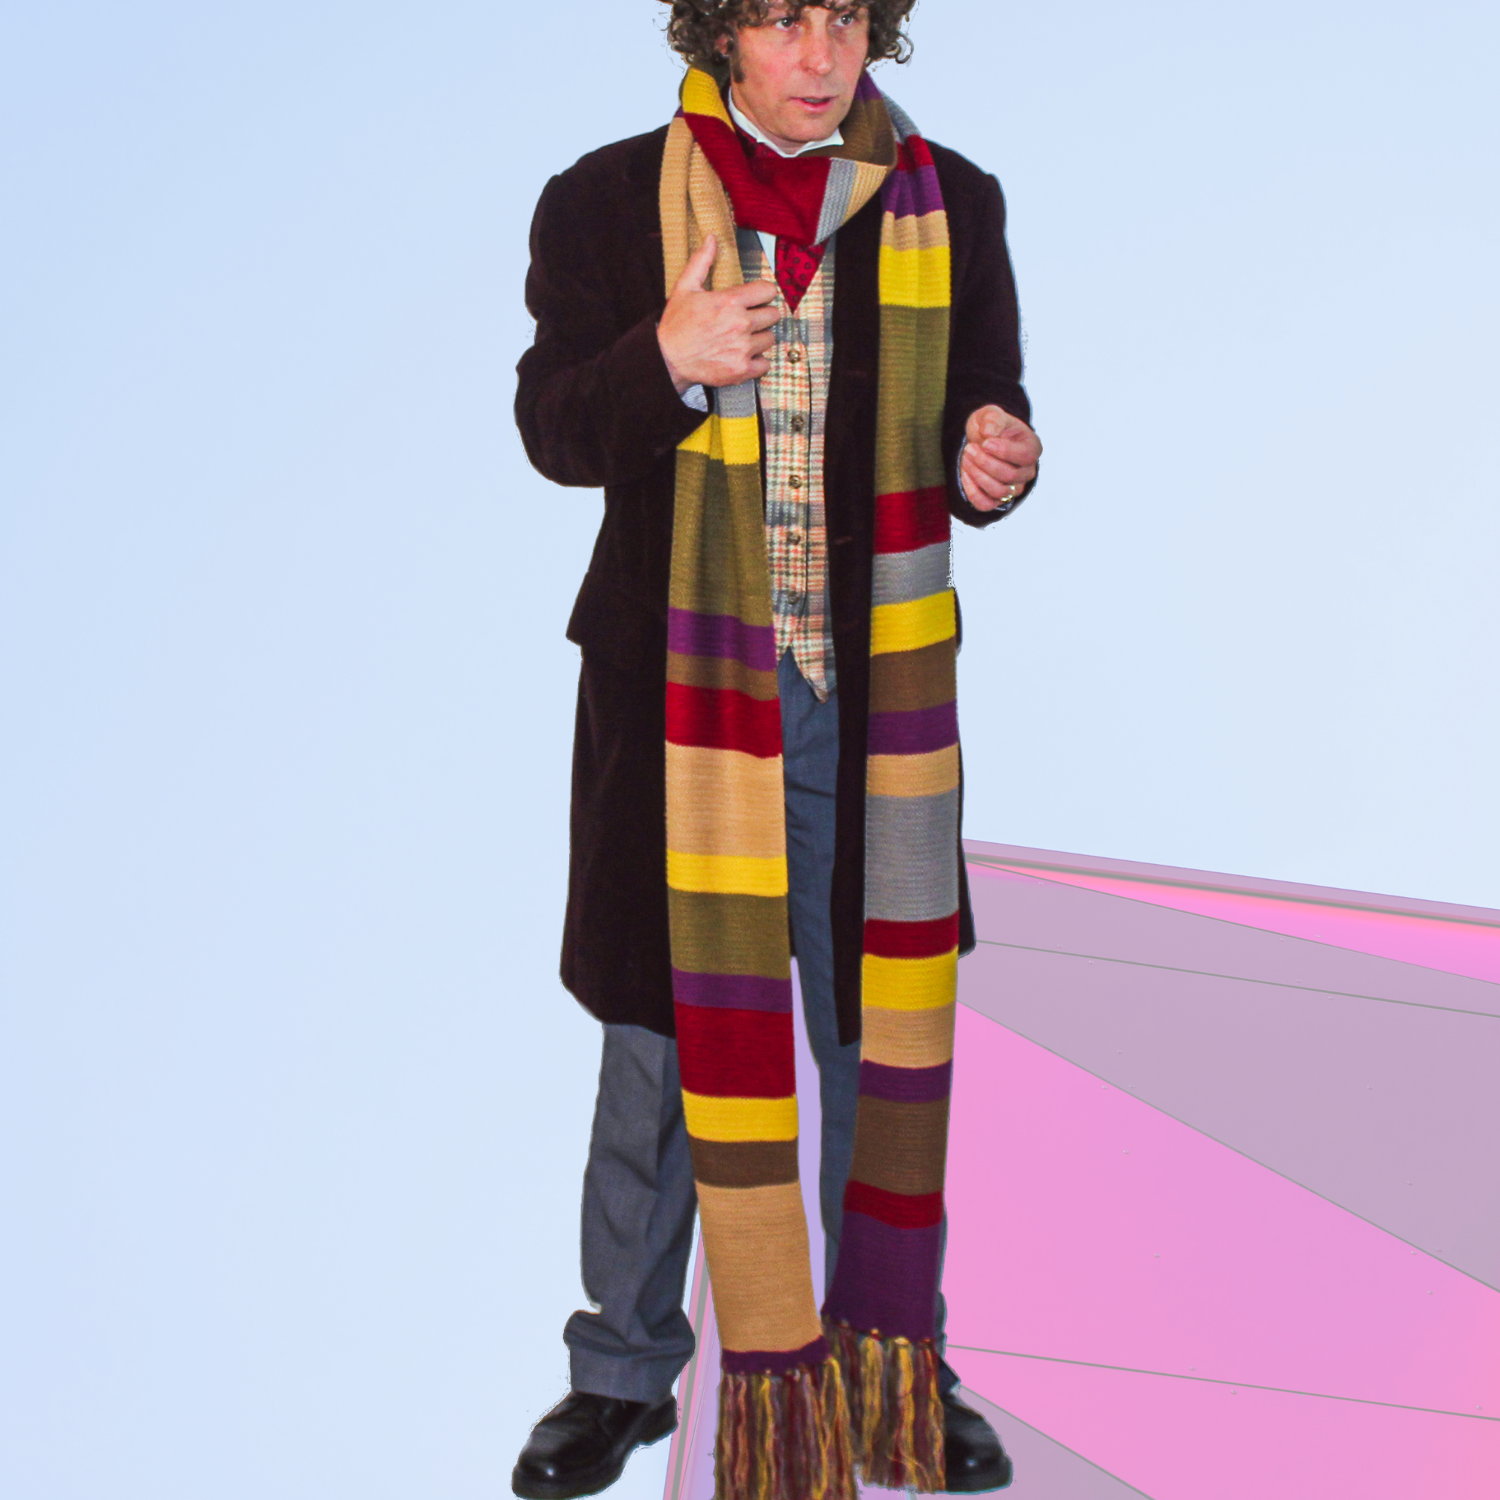 4th doctor costume